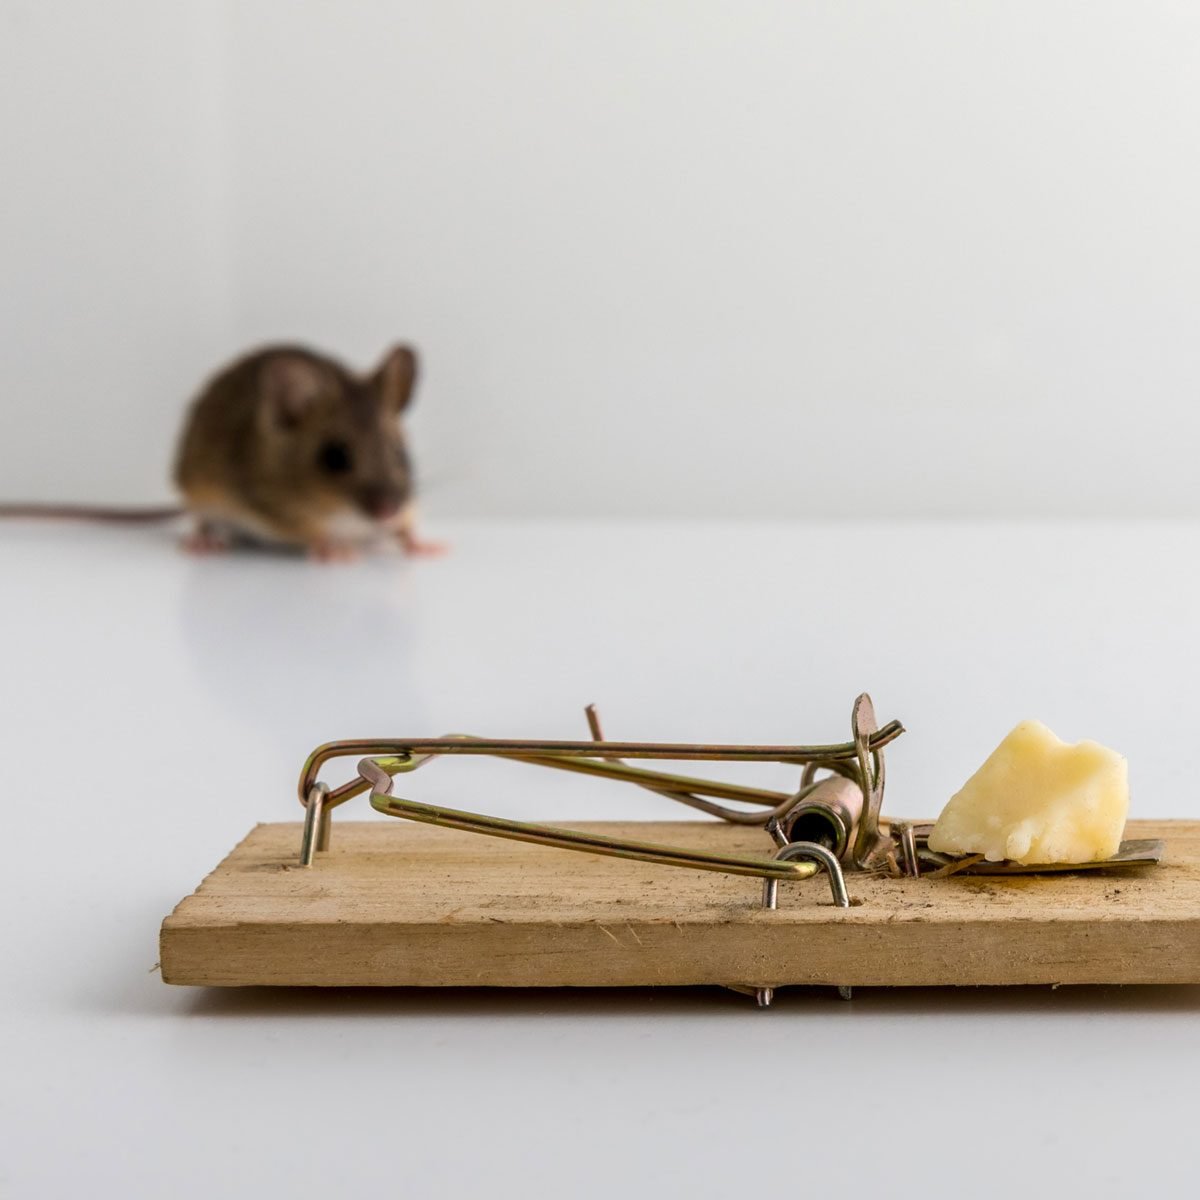 https://www.familyhandyman.com/wp-content/uploads/2021/02/mouse-trap-with-cheese-GettyImages-1030568128.jpg?fit=700%2C1024